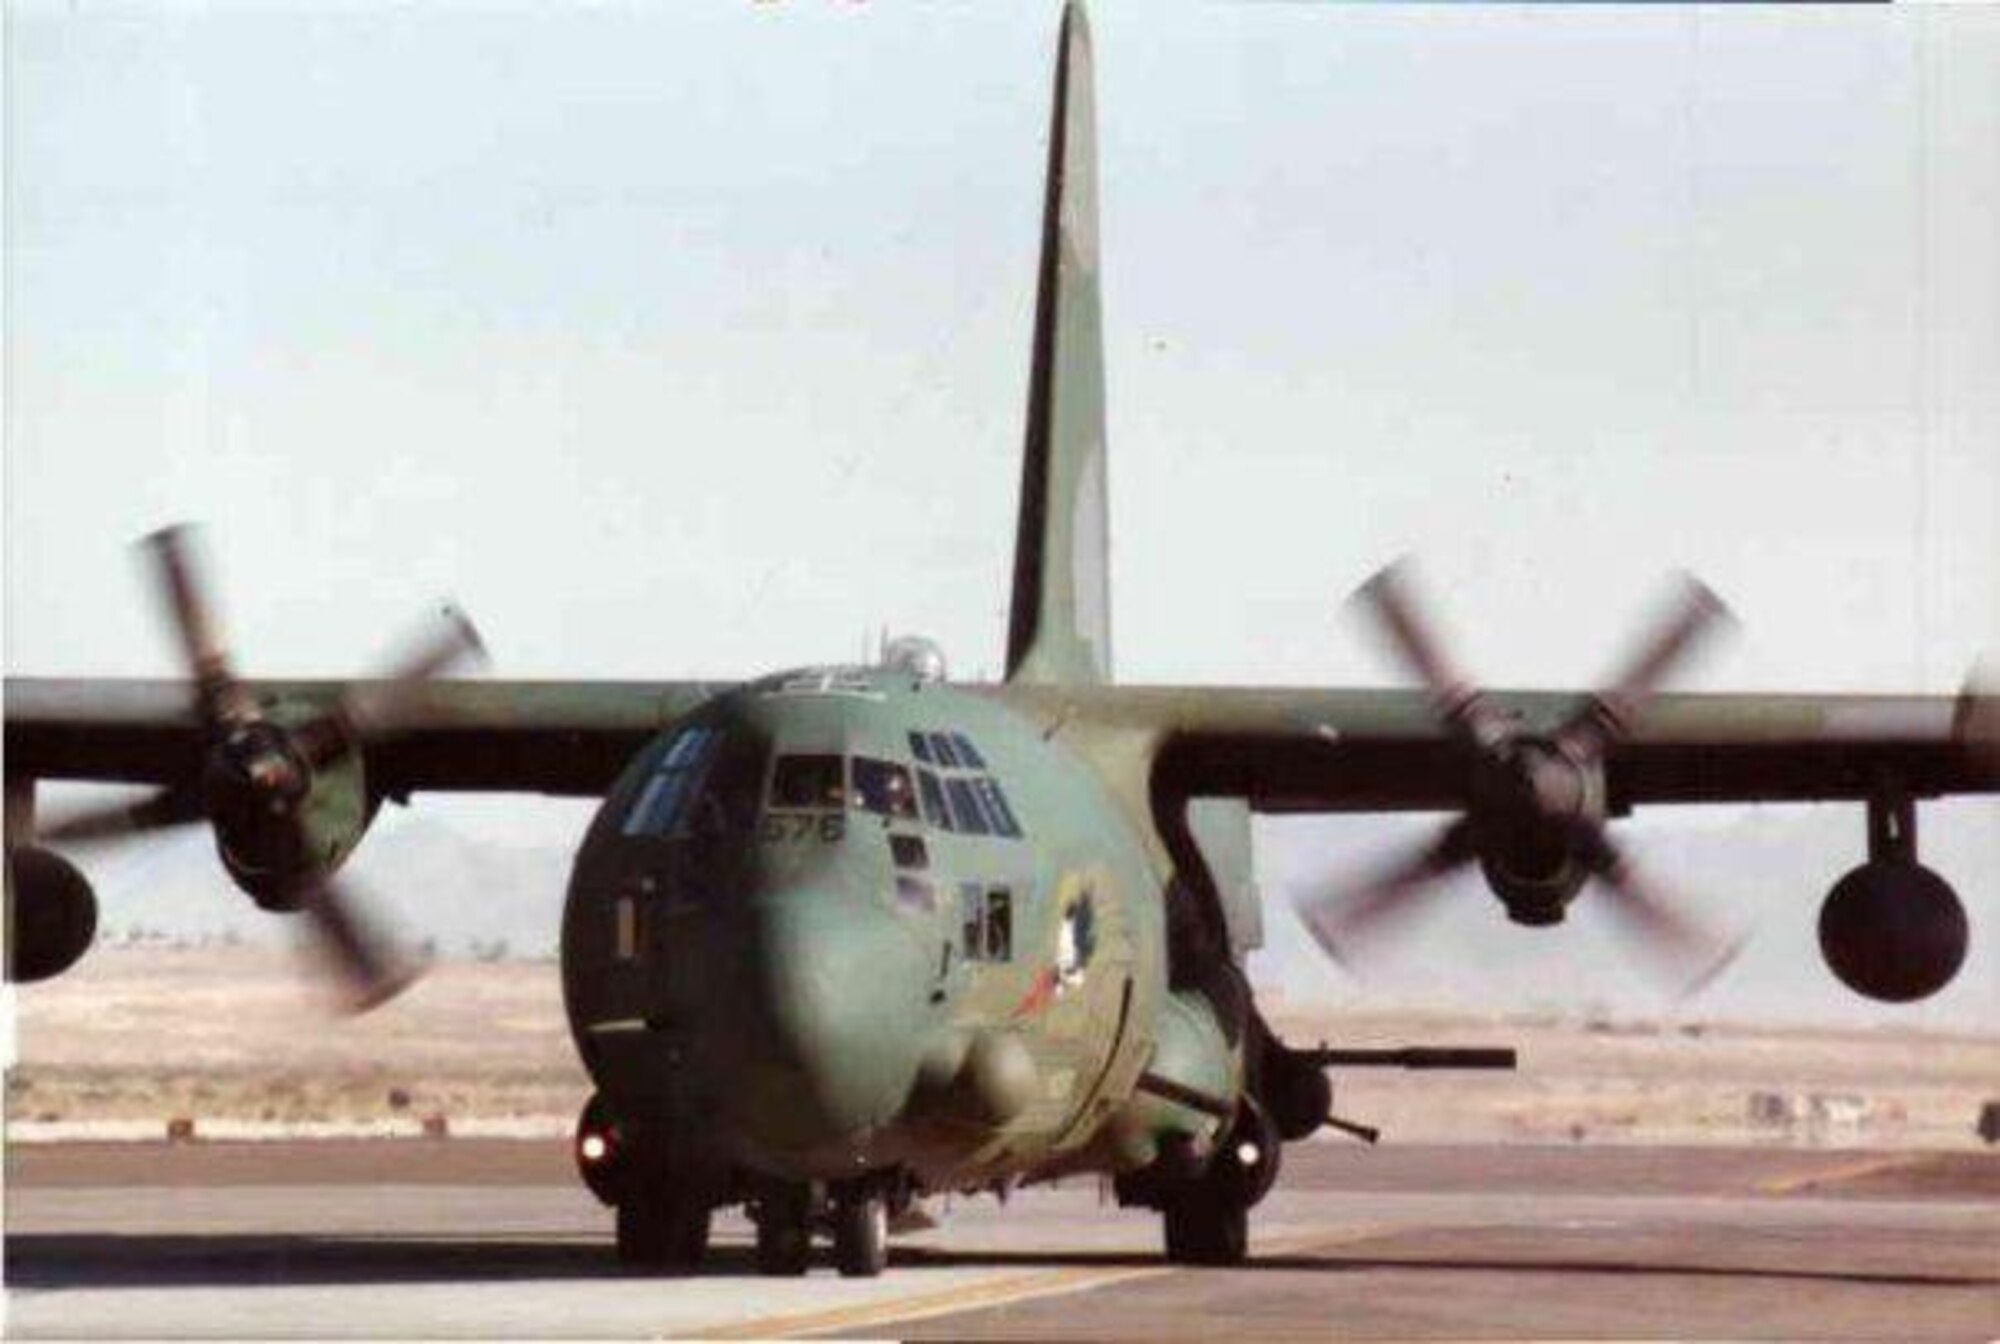 Aircraft 69-6576 painted in the European camouflage scheme (Jockey 14). While supporting operations in Somalia on March 14, 1994, a gun explosion caused loss of the aircraft and eight crewmembers. (U.S. Air Force Courtesy Photo)